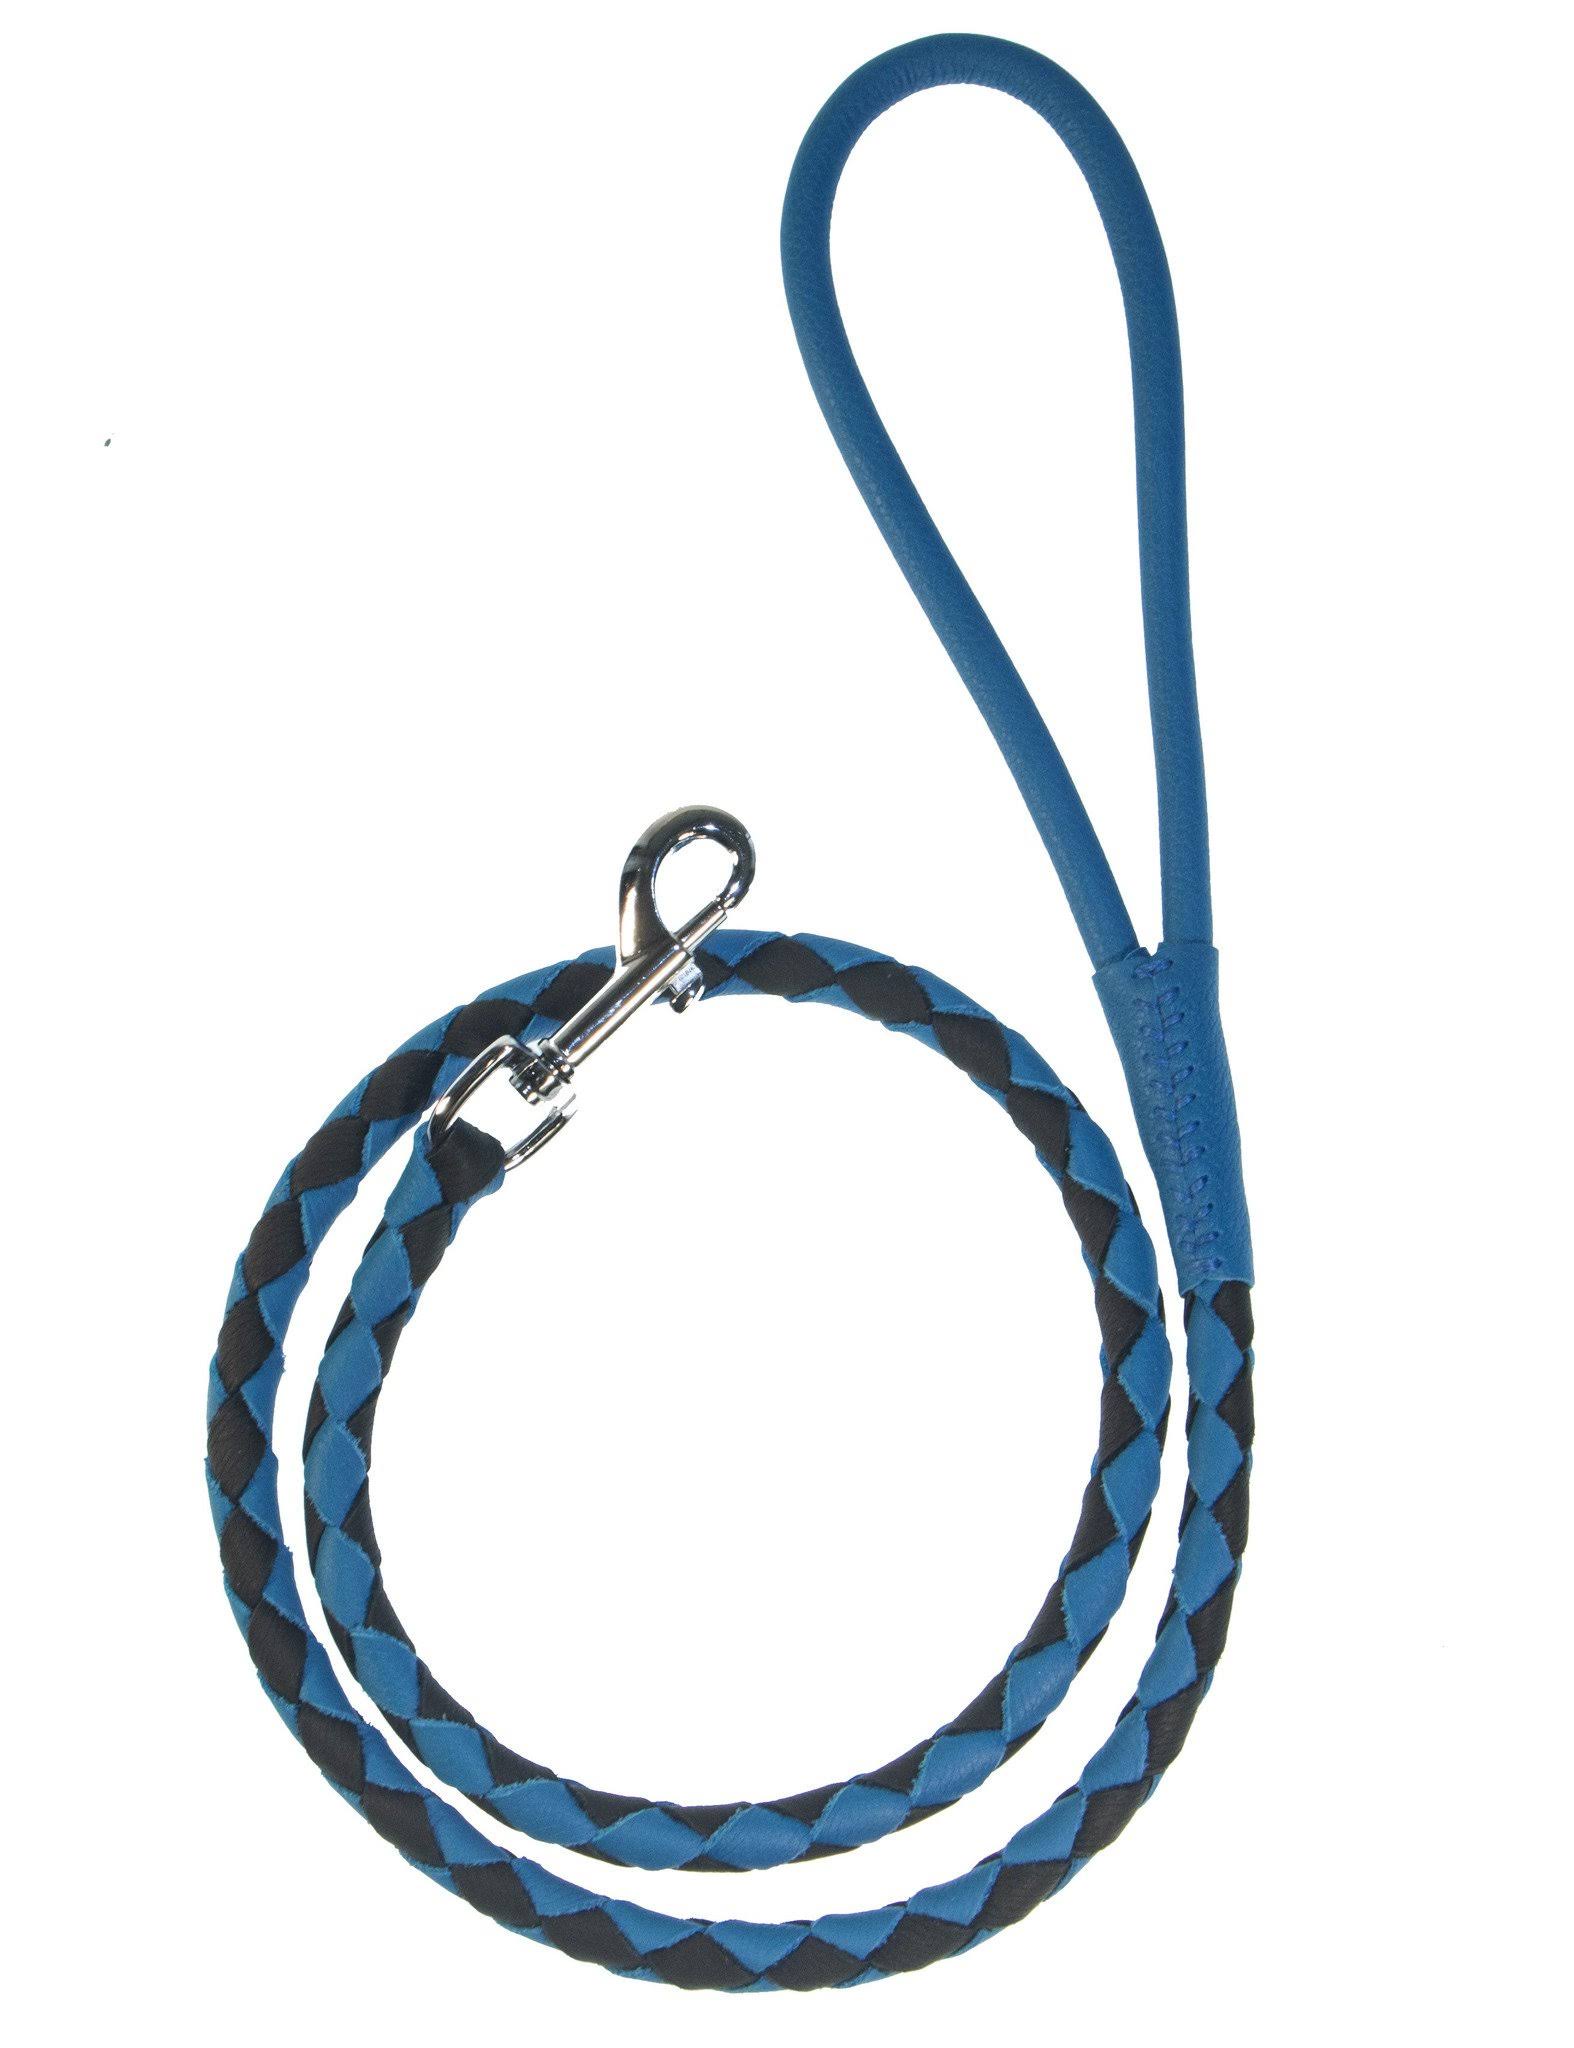 Dogline Soft and Padded Rolled Round Hand Braided Leather Leash For Dogs | Dogs